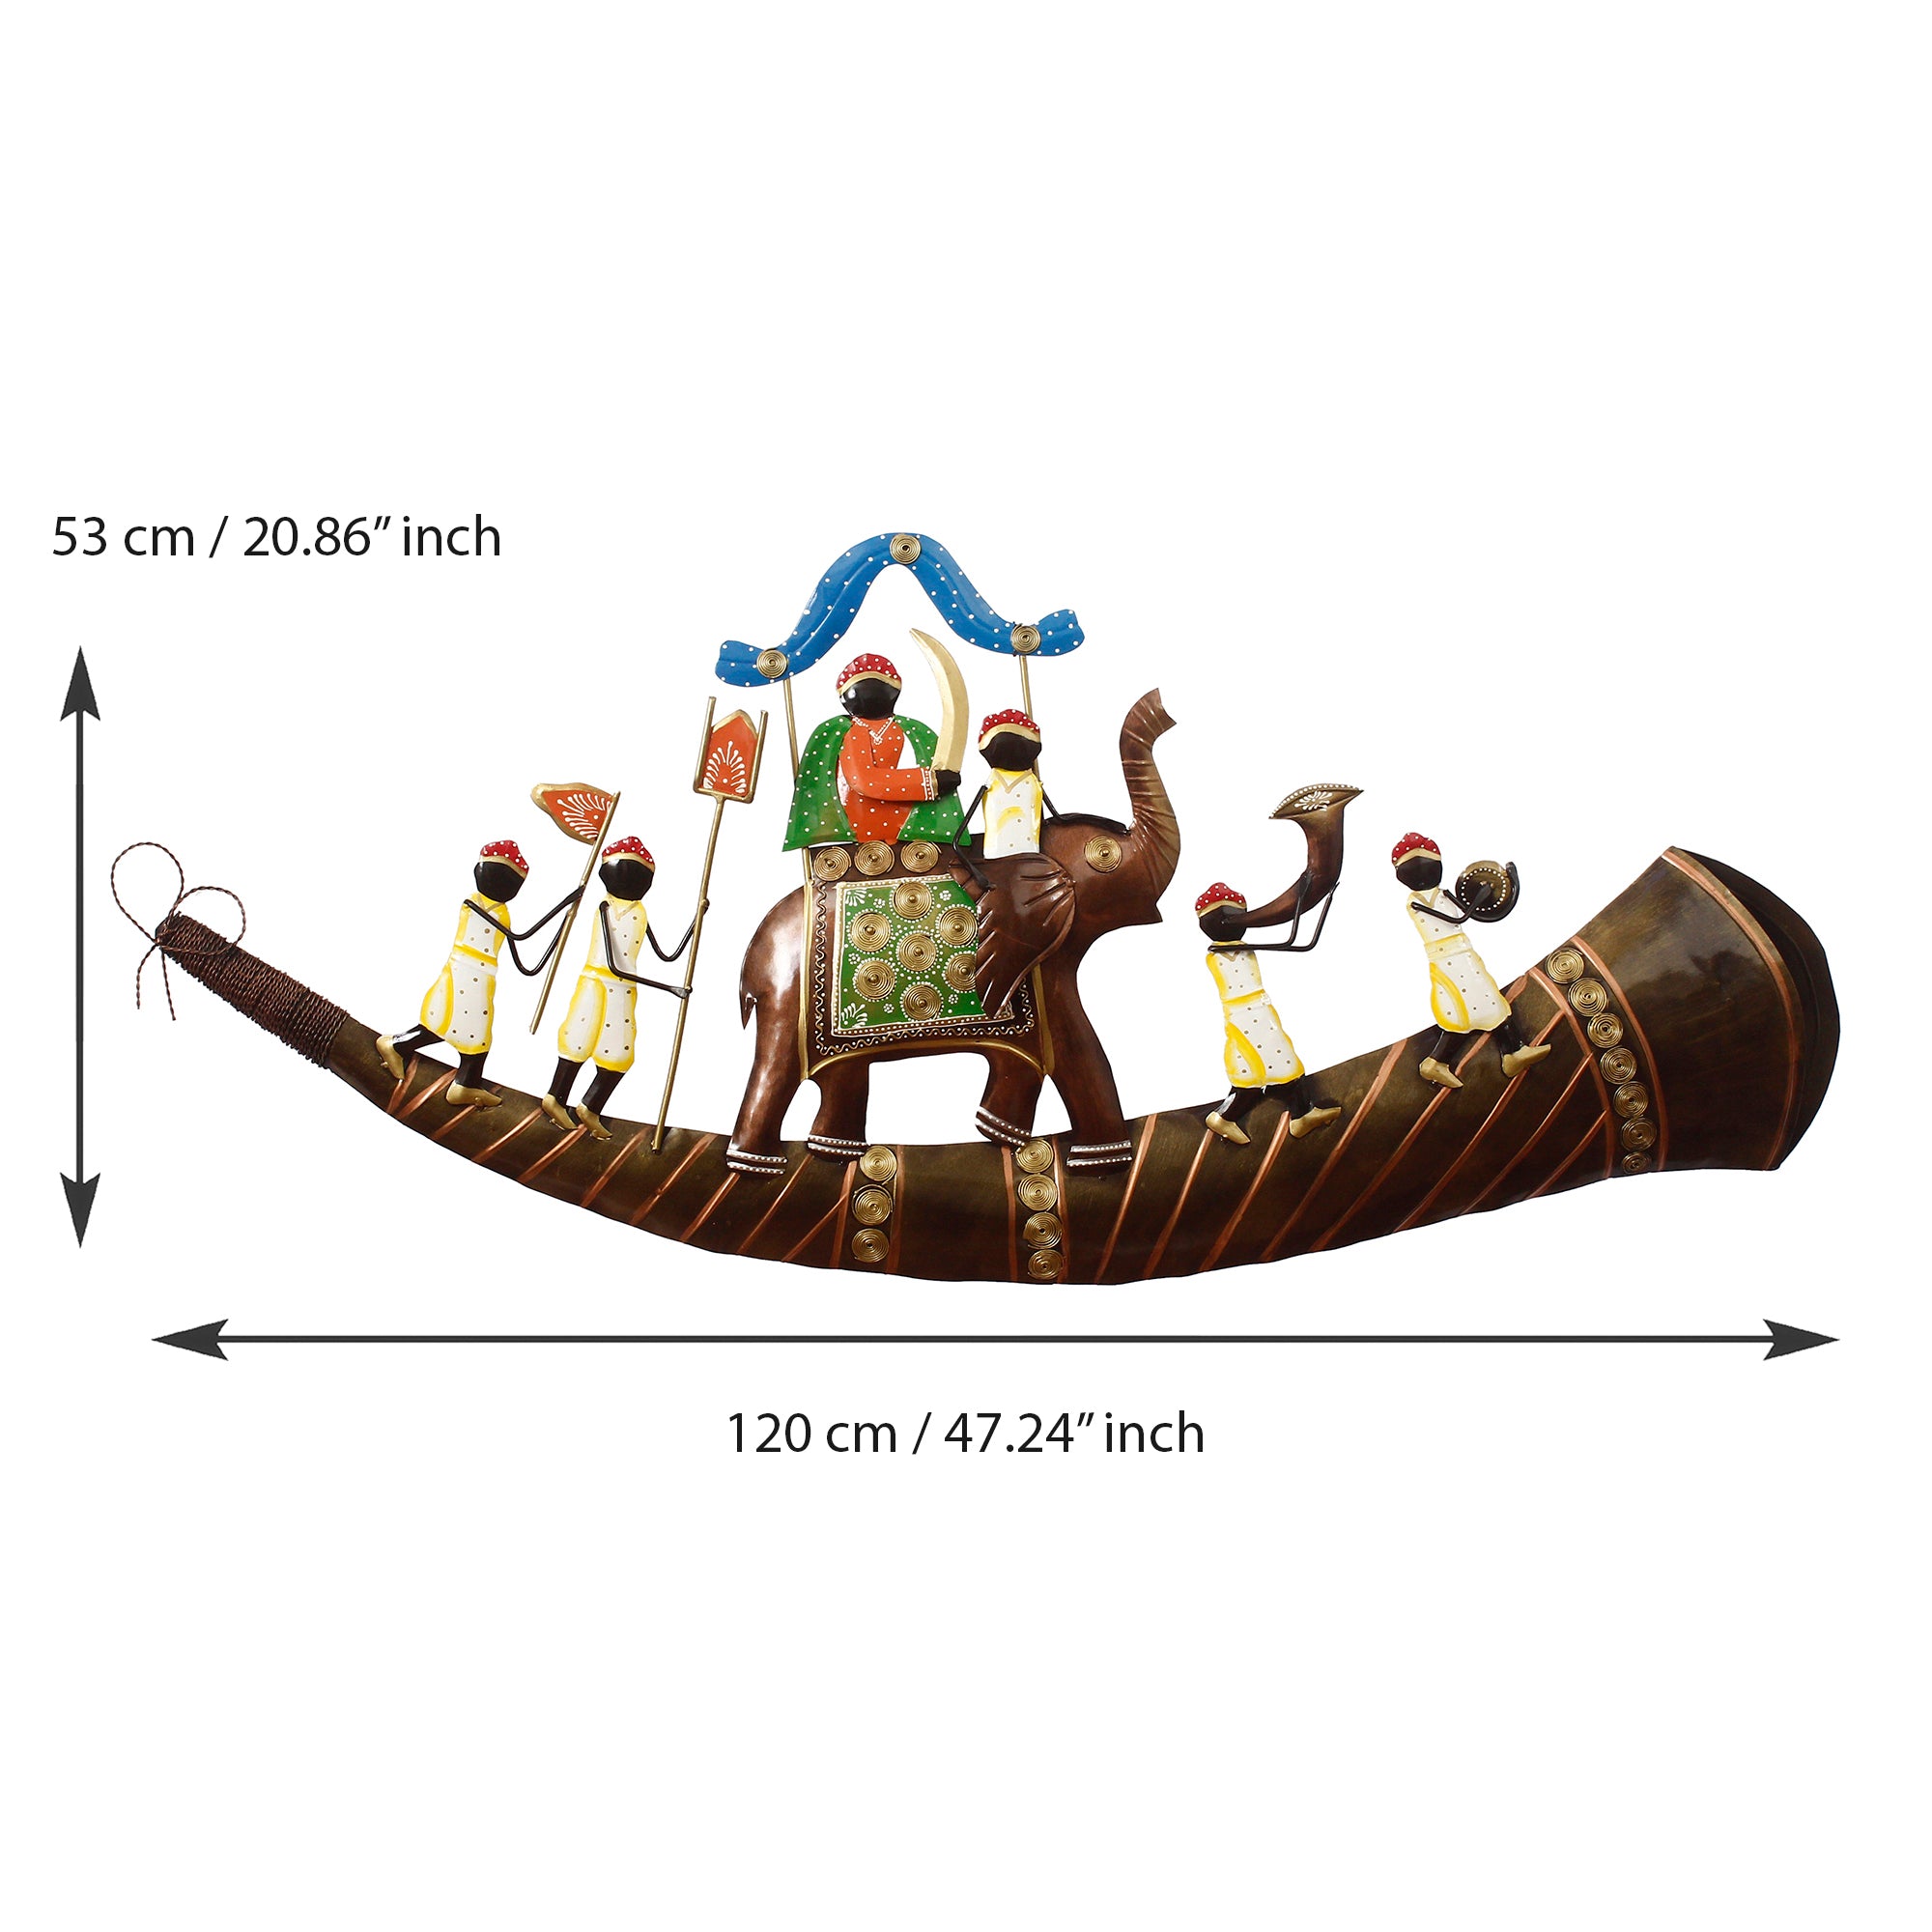 Royal Procession of King on Shehnai Decorative Iron Wall Hanging/Art (Brown, Blue and Green) 3